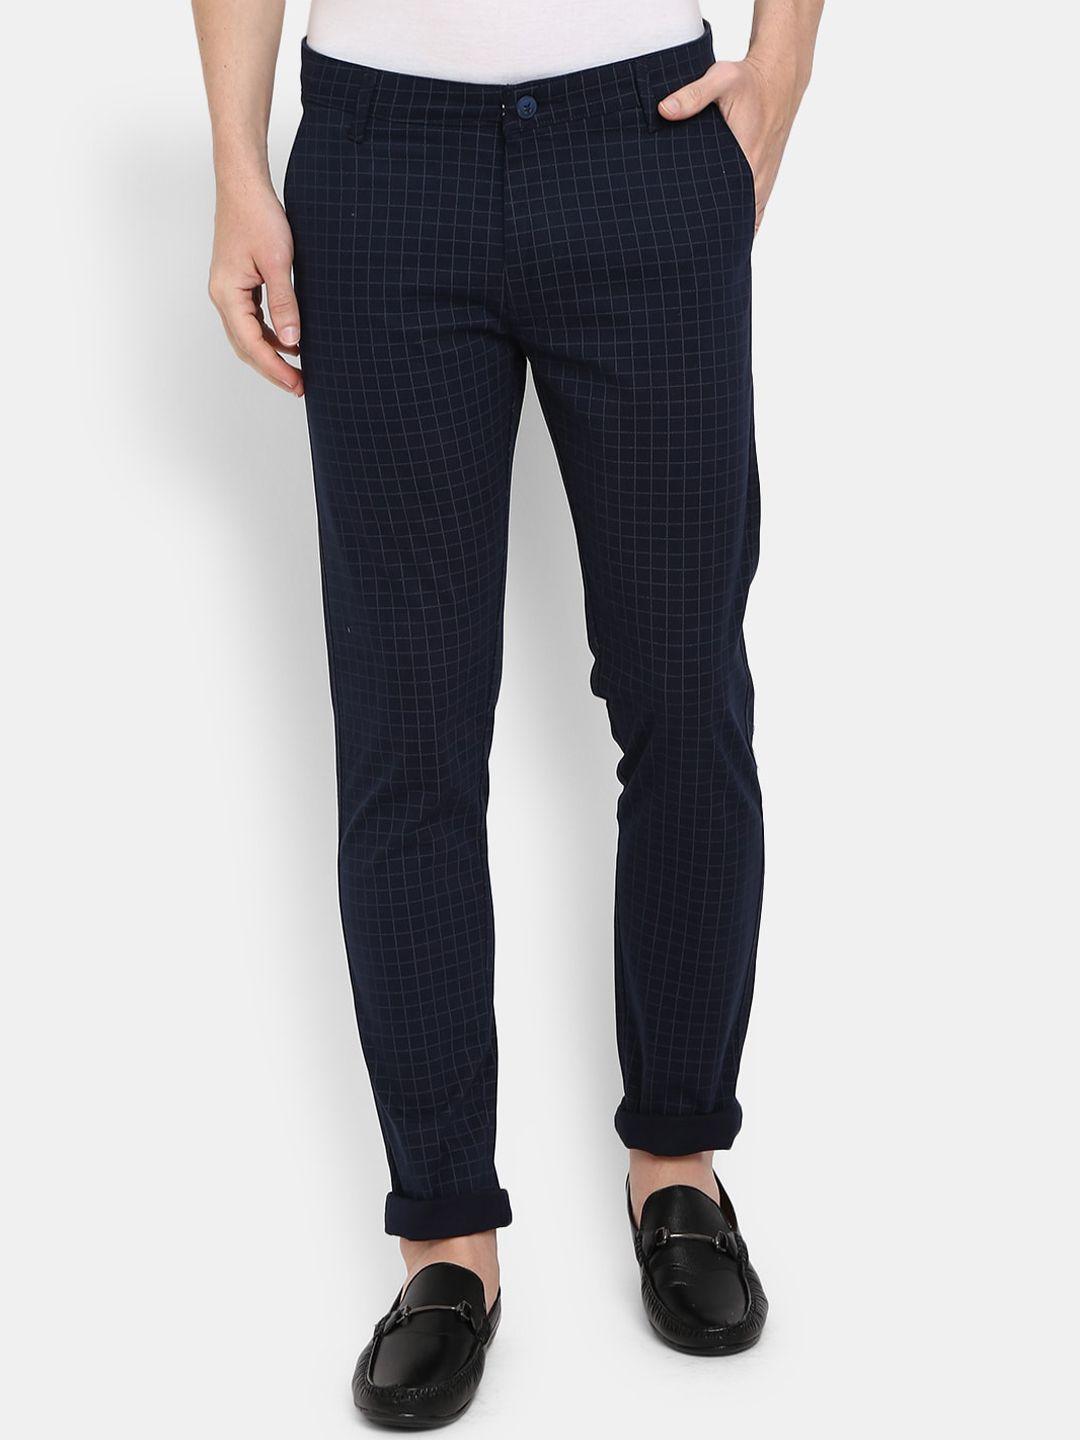 v-mart men navy blue checked classic slim fit trousers